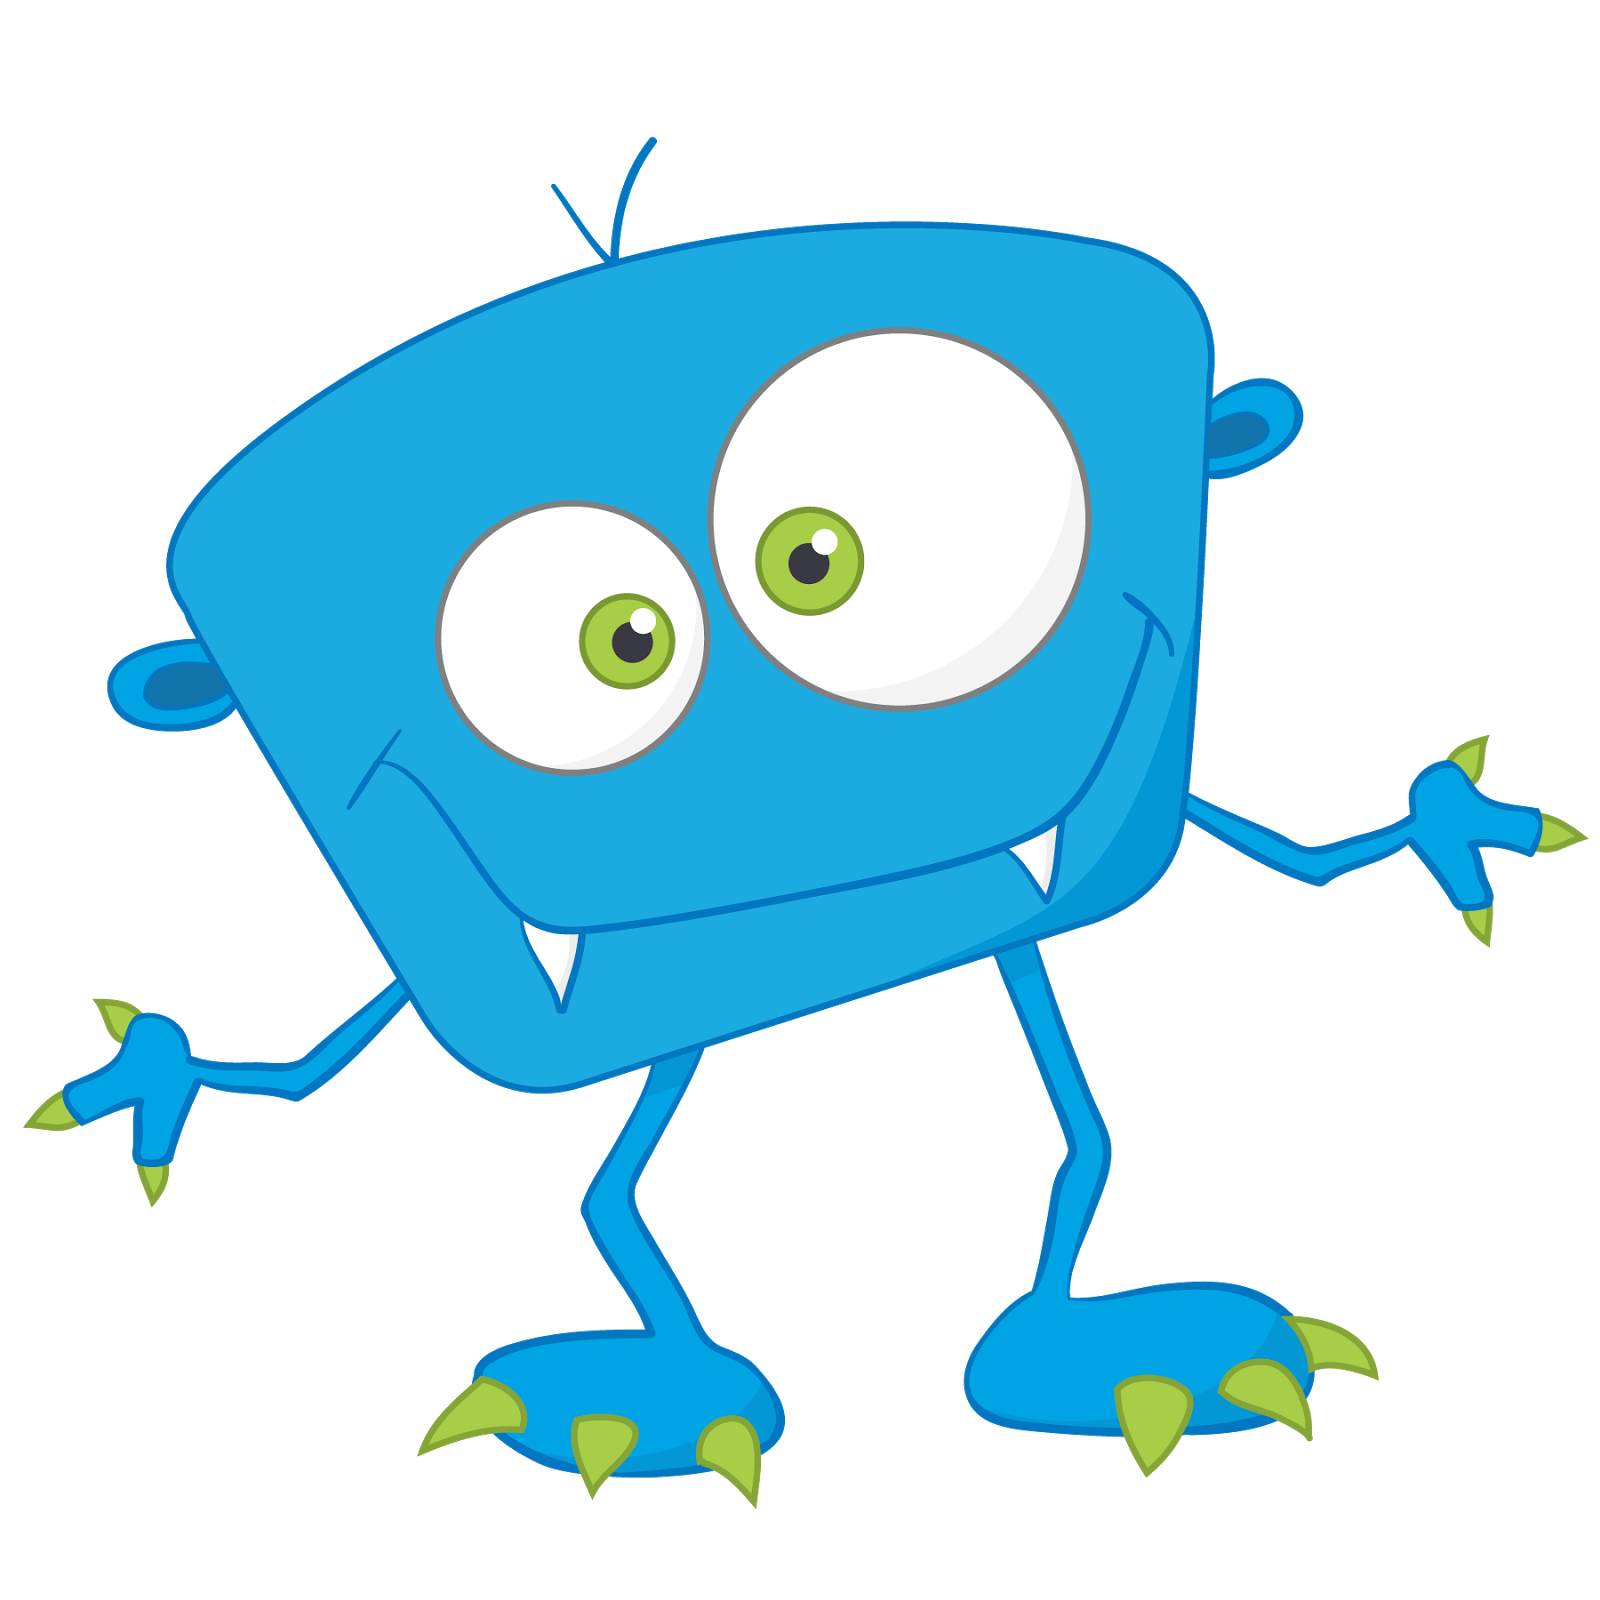 Monster 4 Image Hd Photo Clipart